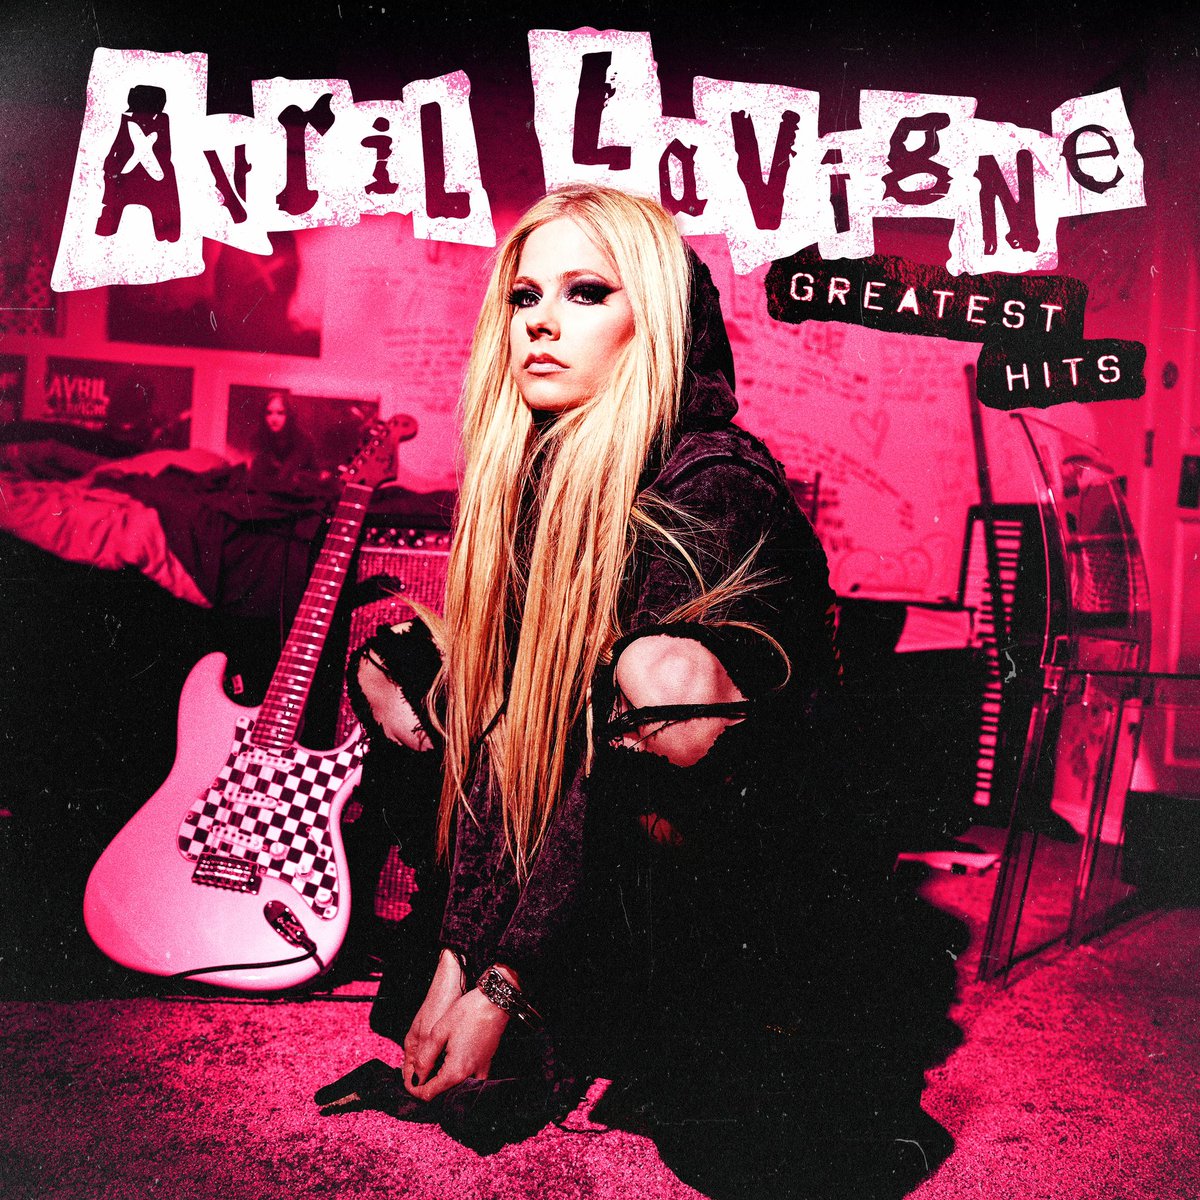 Can't do a greatest hits tour without a greatest hits album!!!   Dropping June 21st 💚🩷🧡🖤   Pre-Order: avrillavigne.lnk.to/GreatestHits